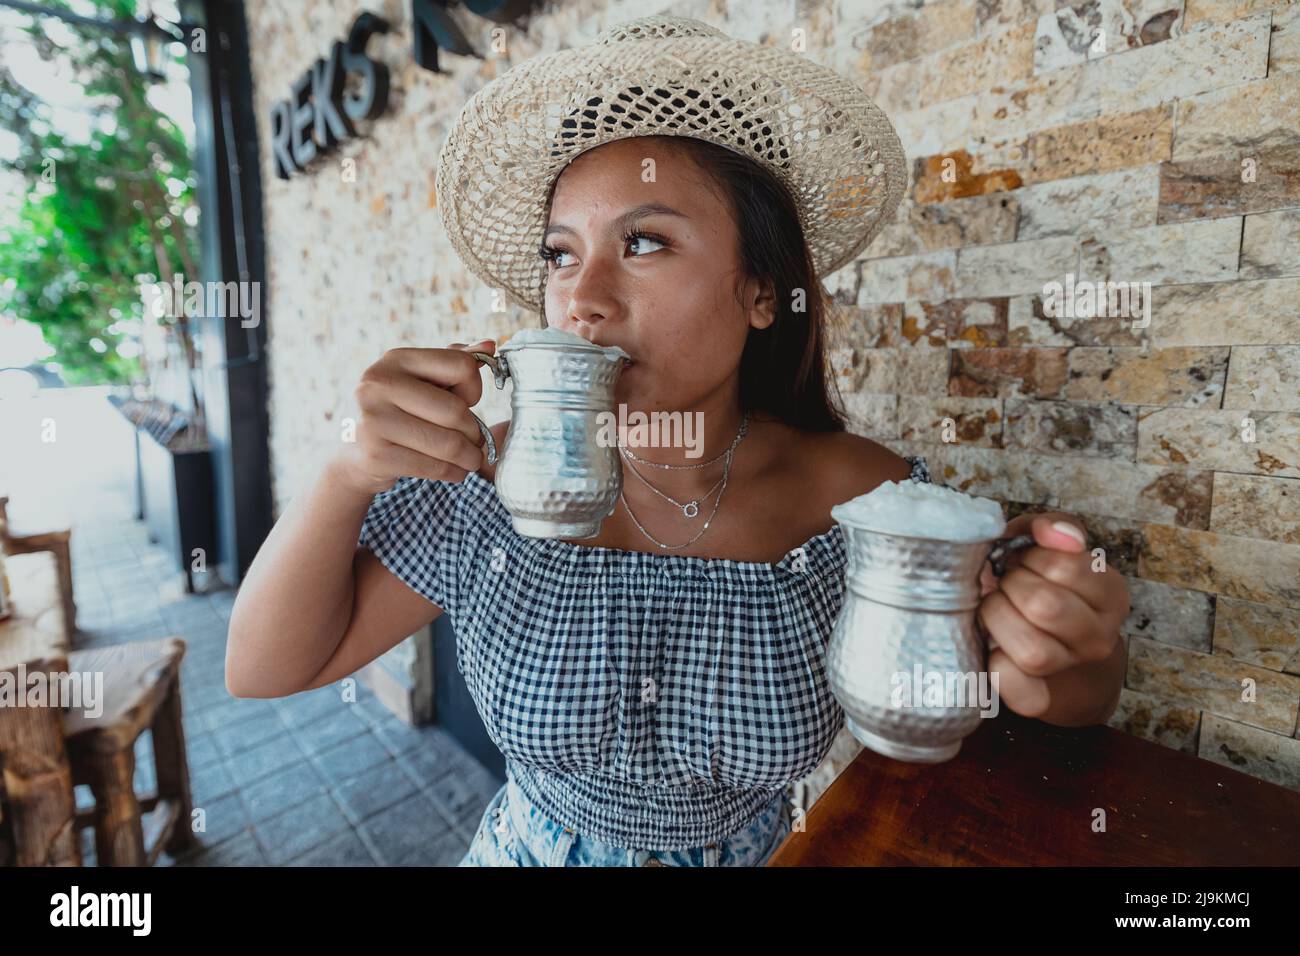 young indonesian girl drinking ayran in a silver cup wearing a hat during summer Stock Photo